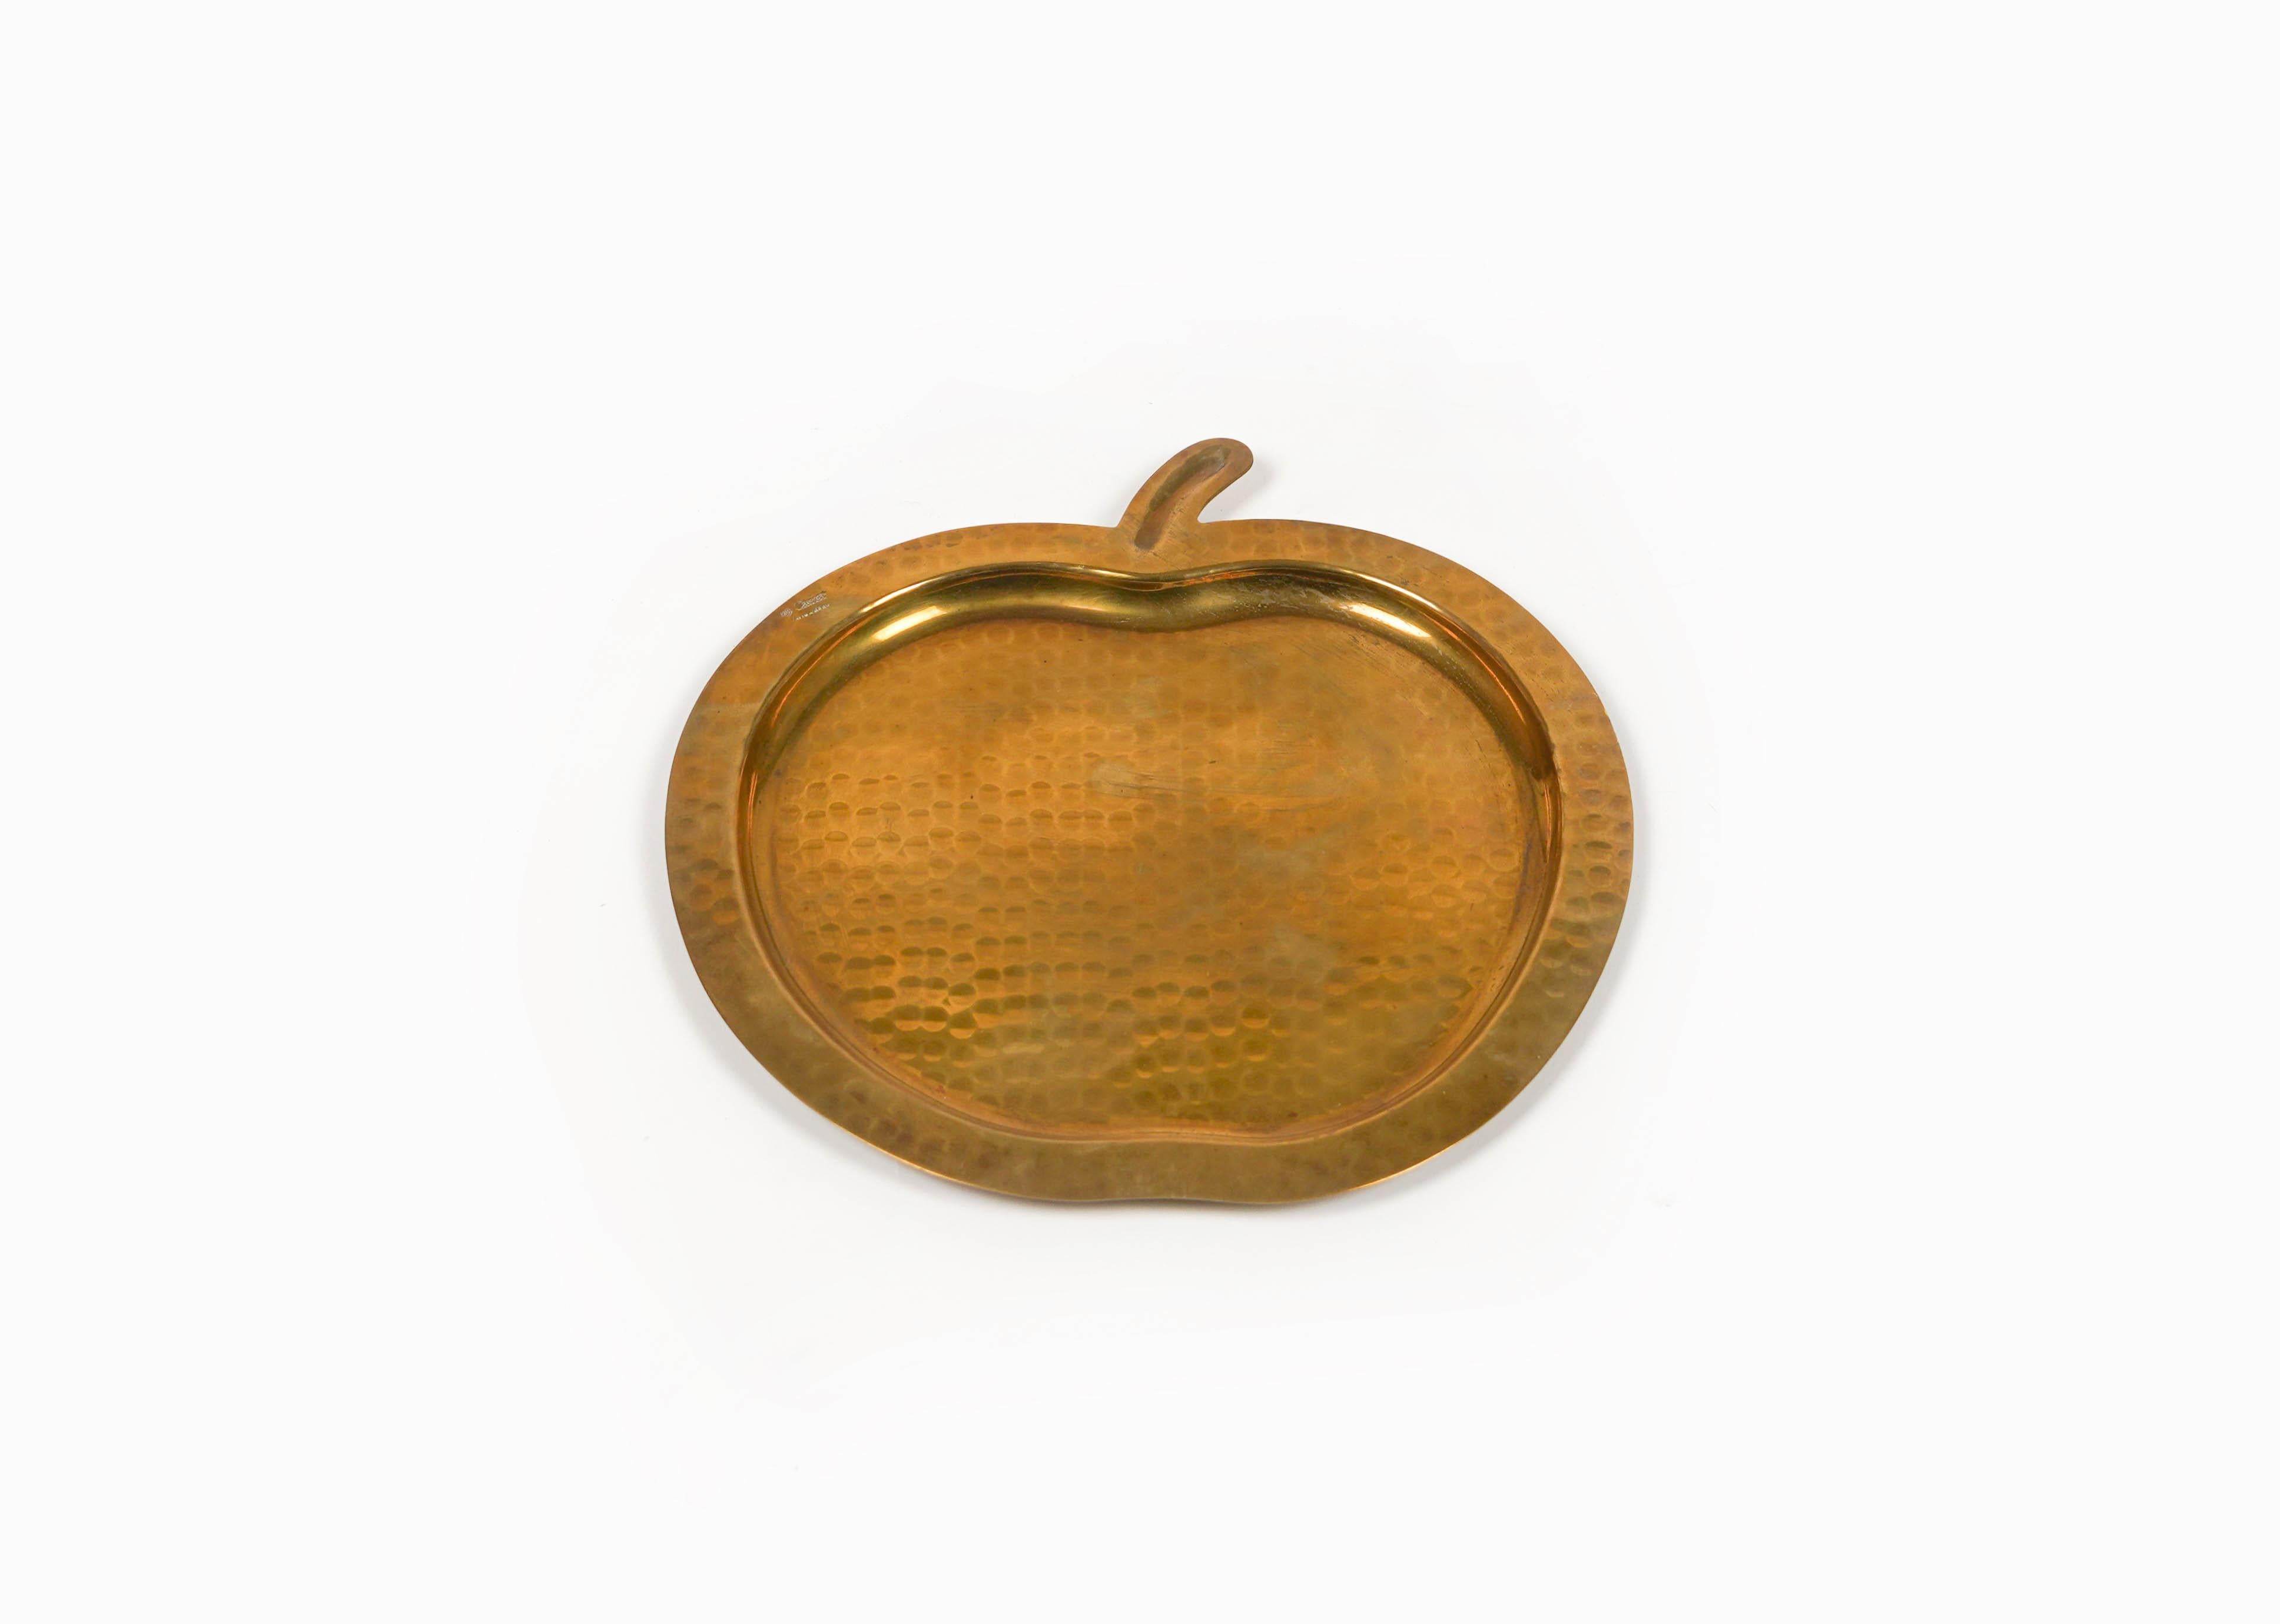 Amazing vide-poche or centerpiece apple-shape in brass by Renzo Cassetti.

The unique feature of this item is that, as you can see from the Italian words in the engraving, 